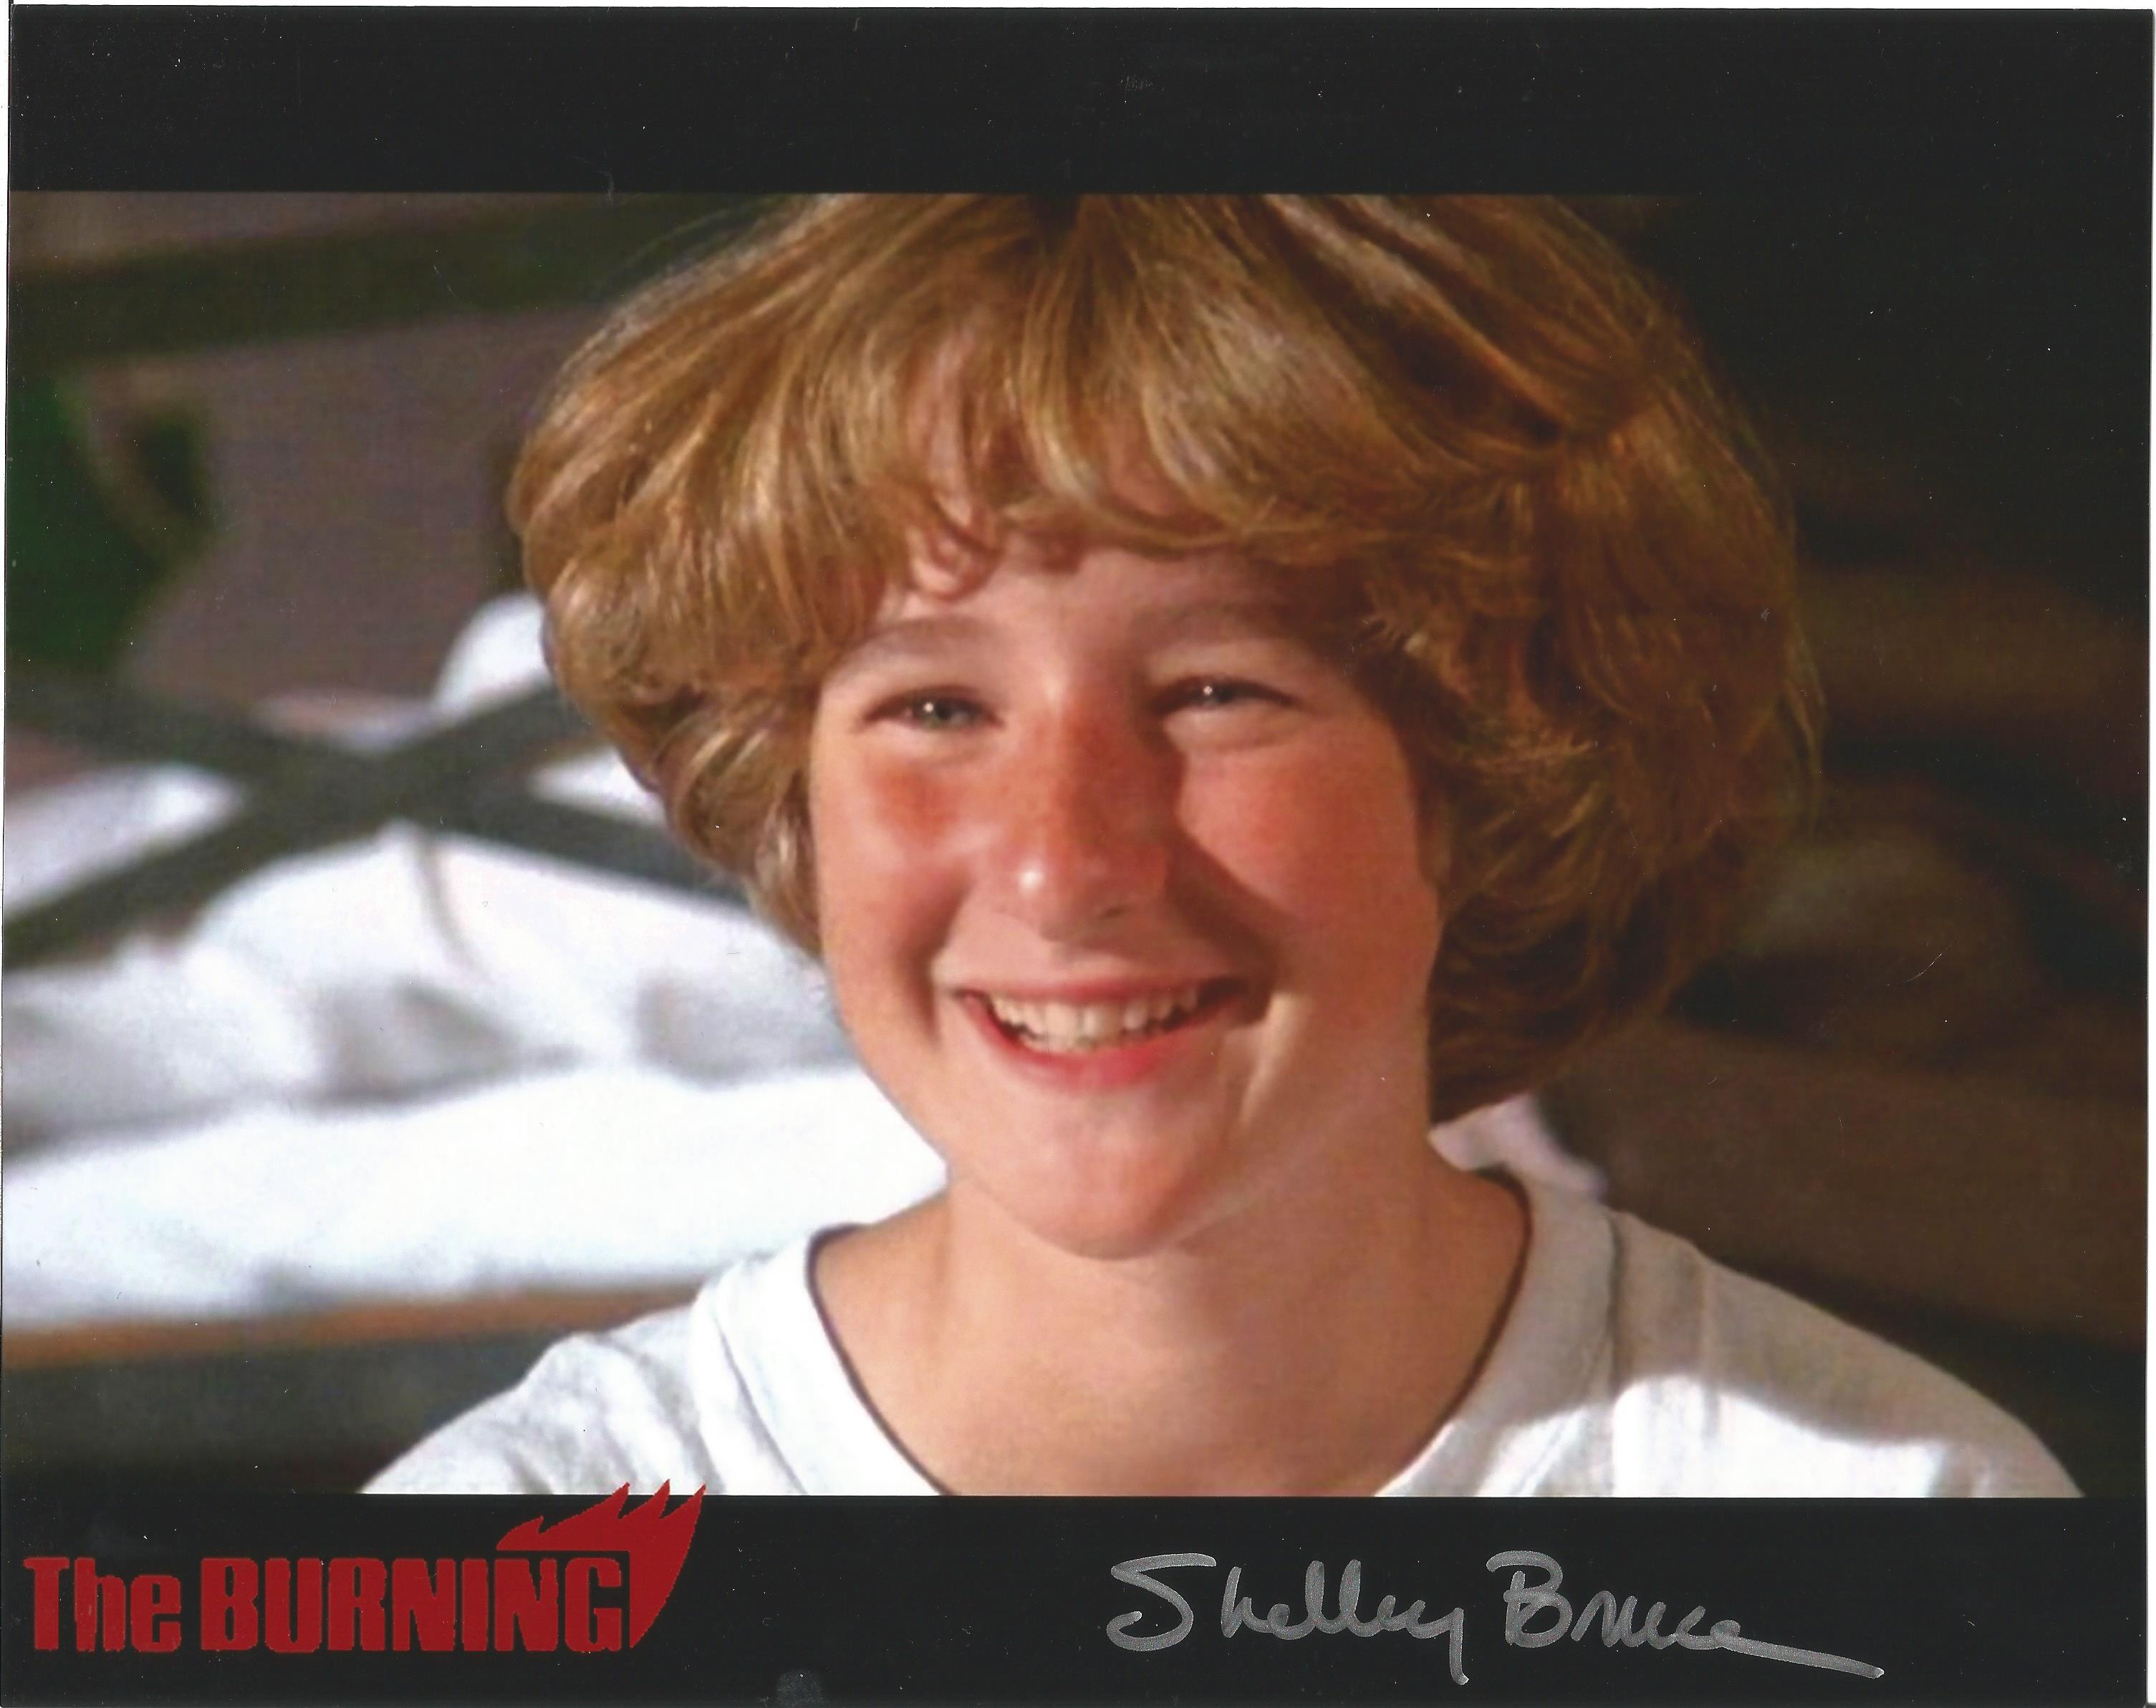 Shelley Bruce signed 10x8 colour photo. Good condition. All autographs come with a Certificate of